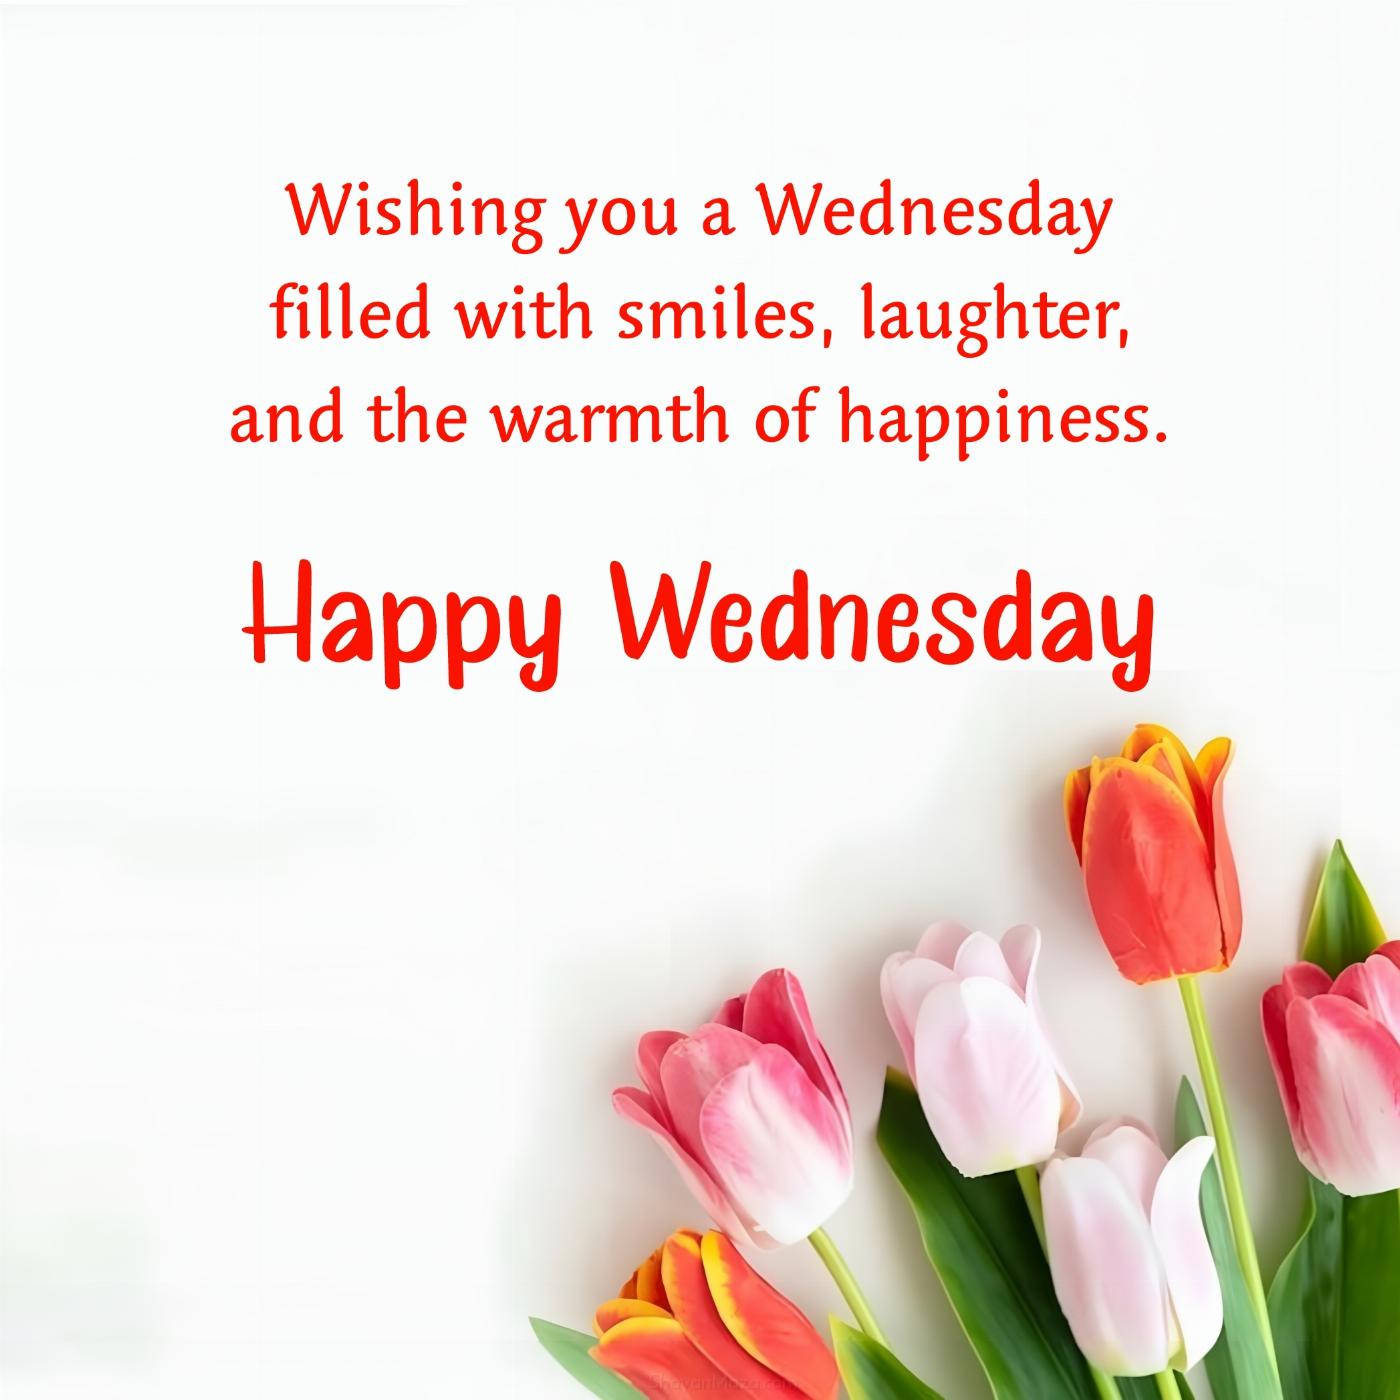 Wishing you a Wednesday filled with smiles laughter